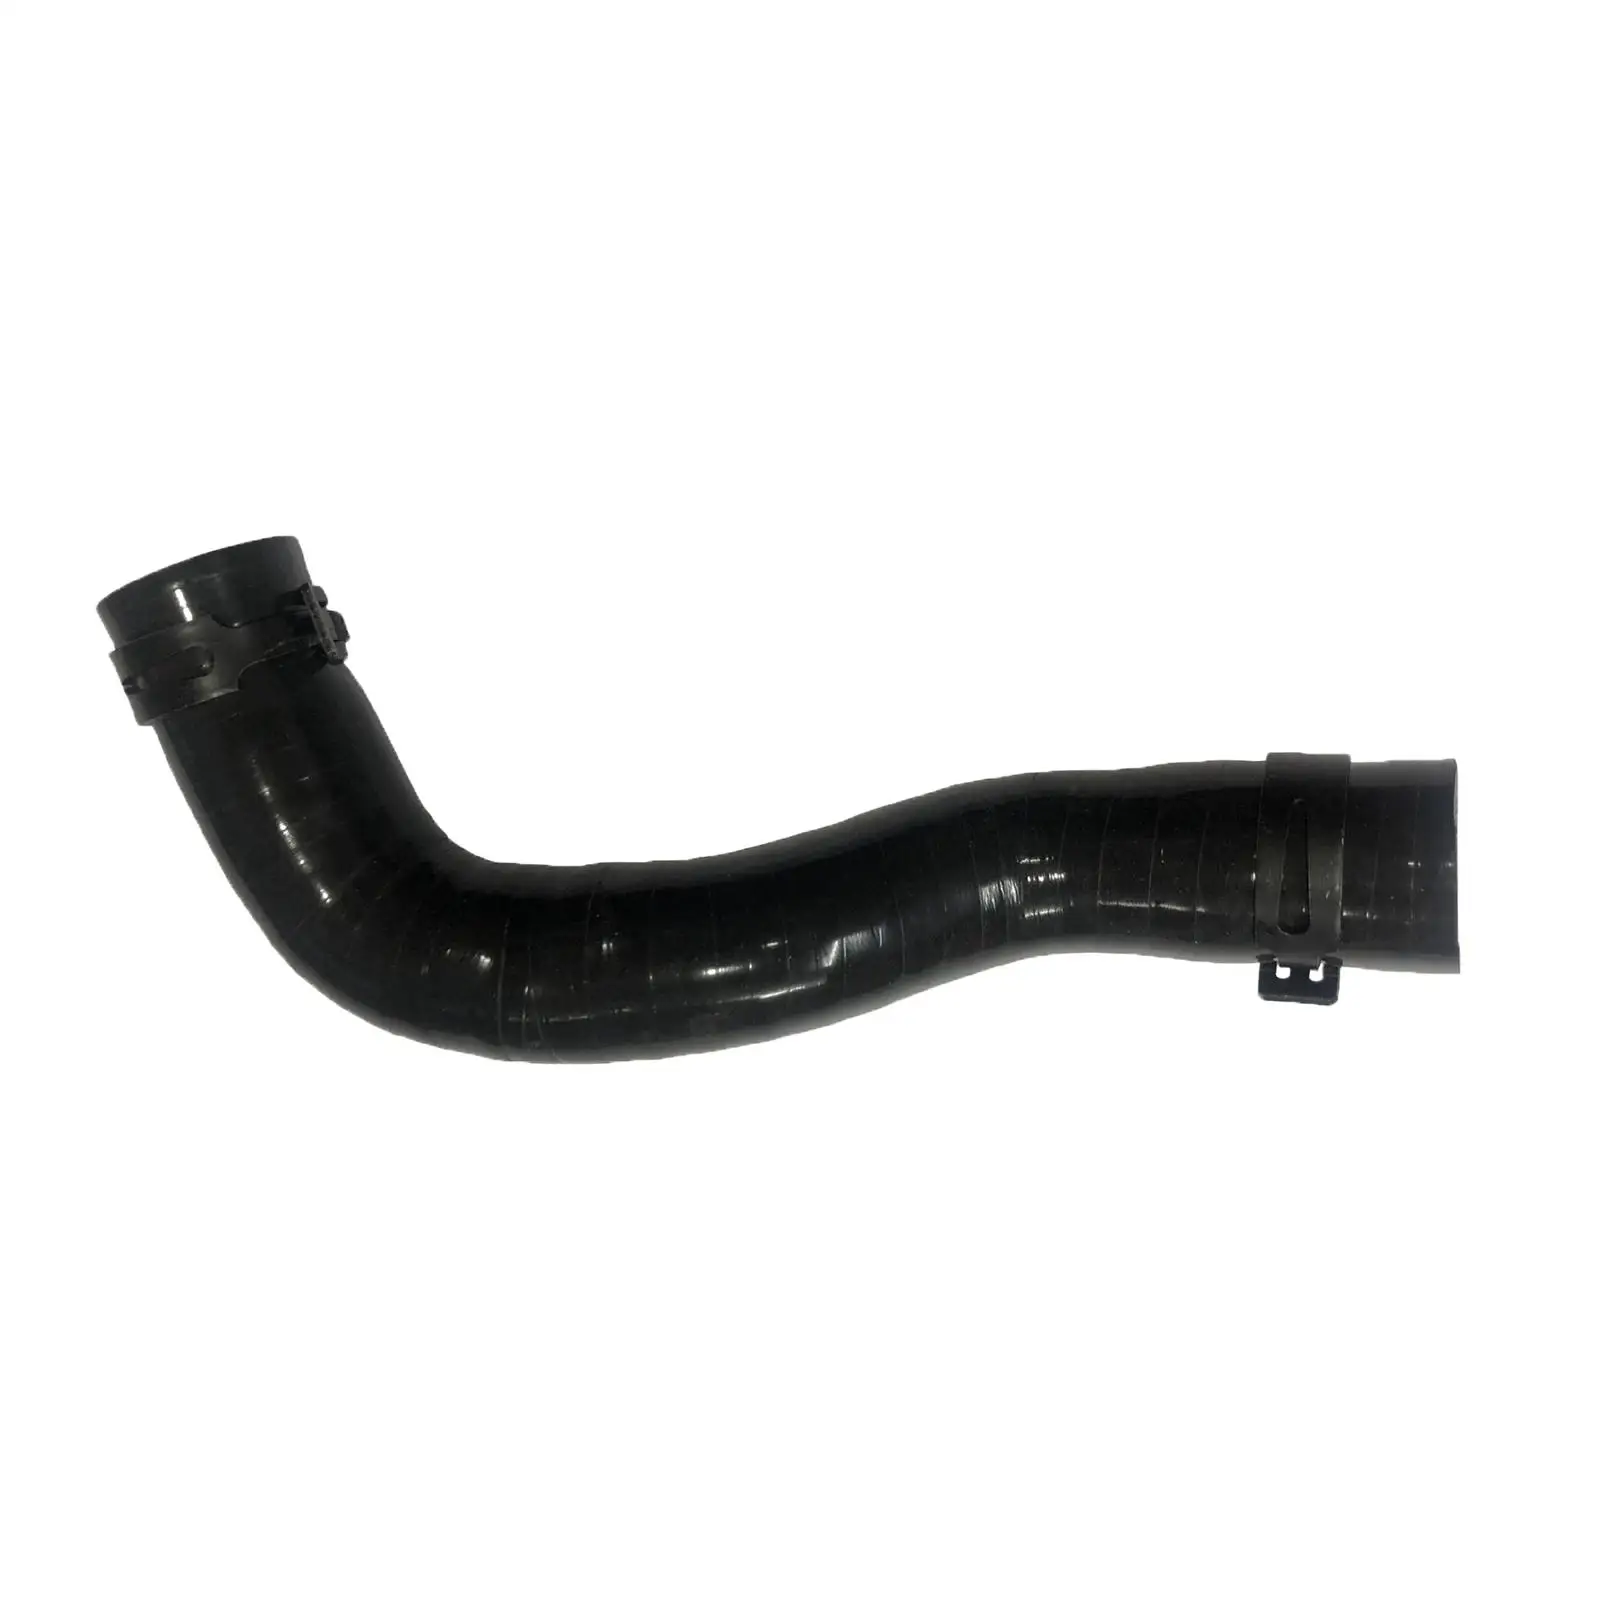 Turbocharger Intake Pipe Repair Hose 2710901929 for W172 W204 W212